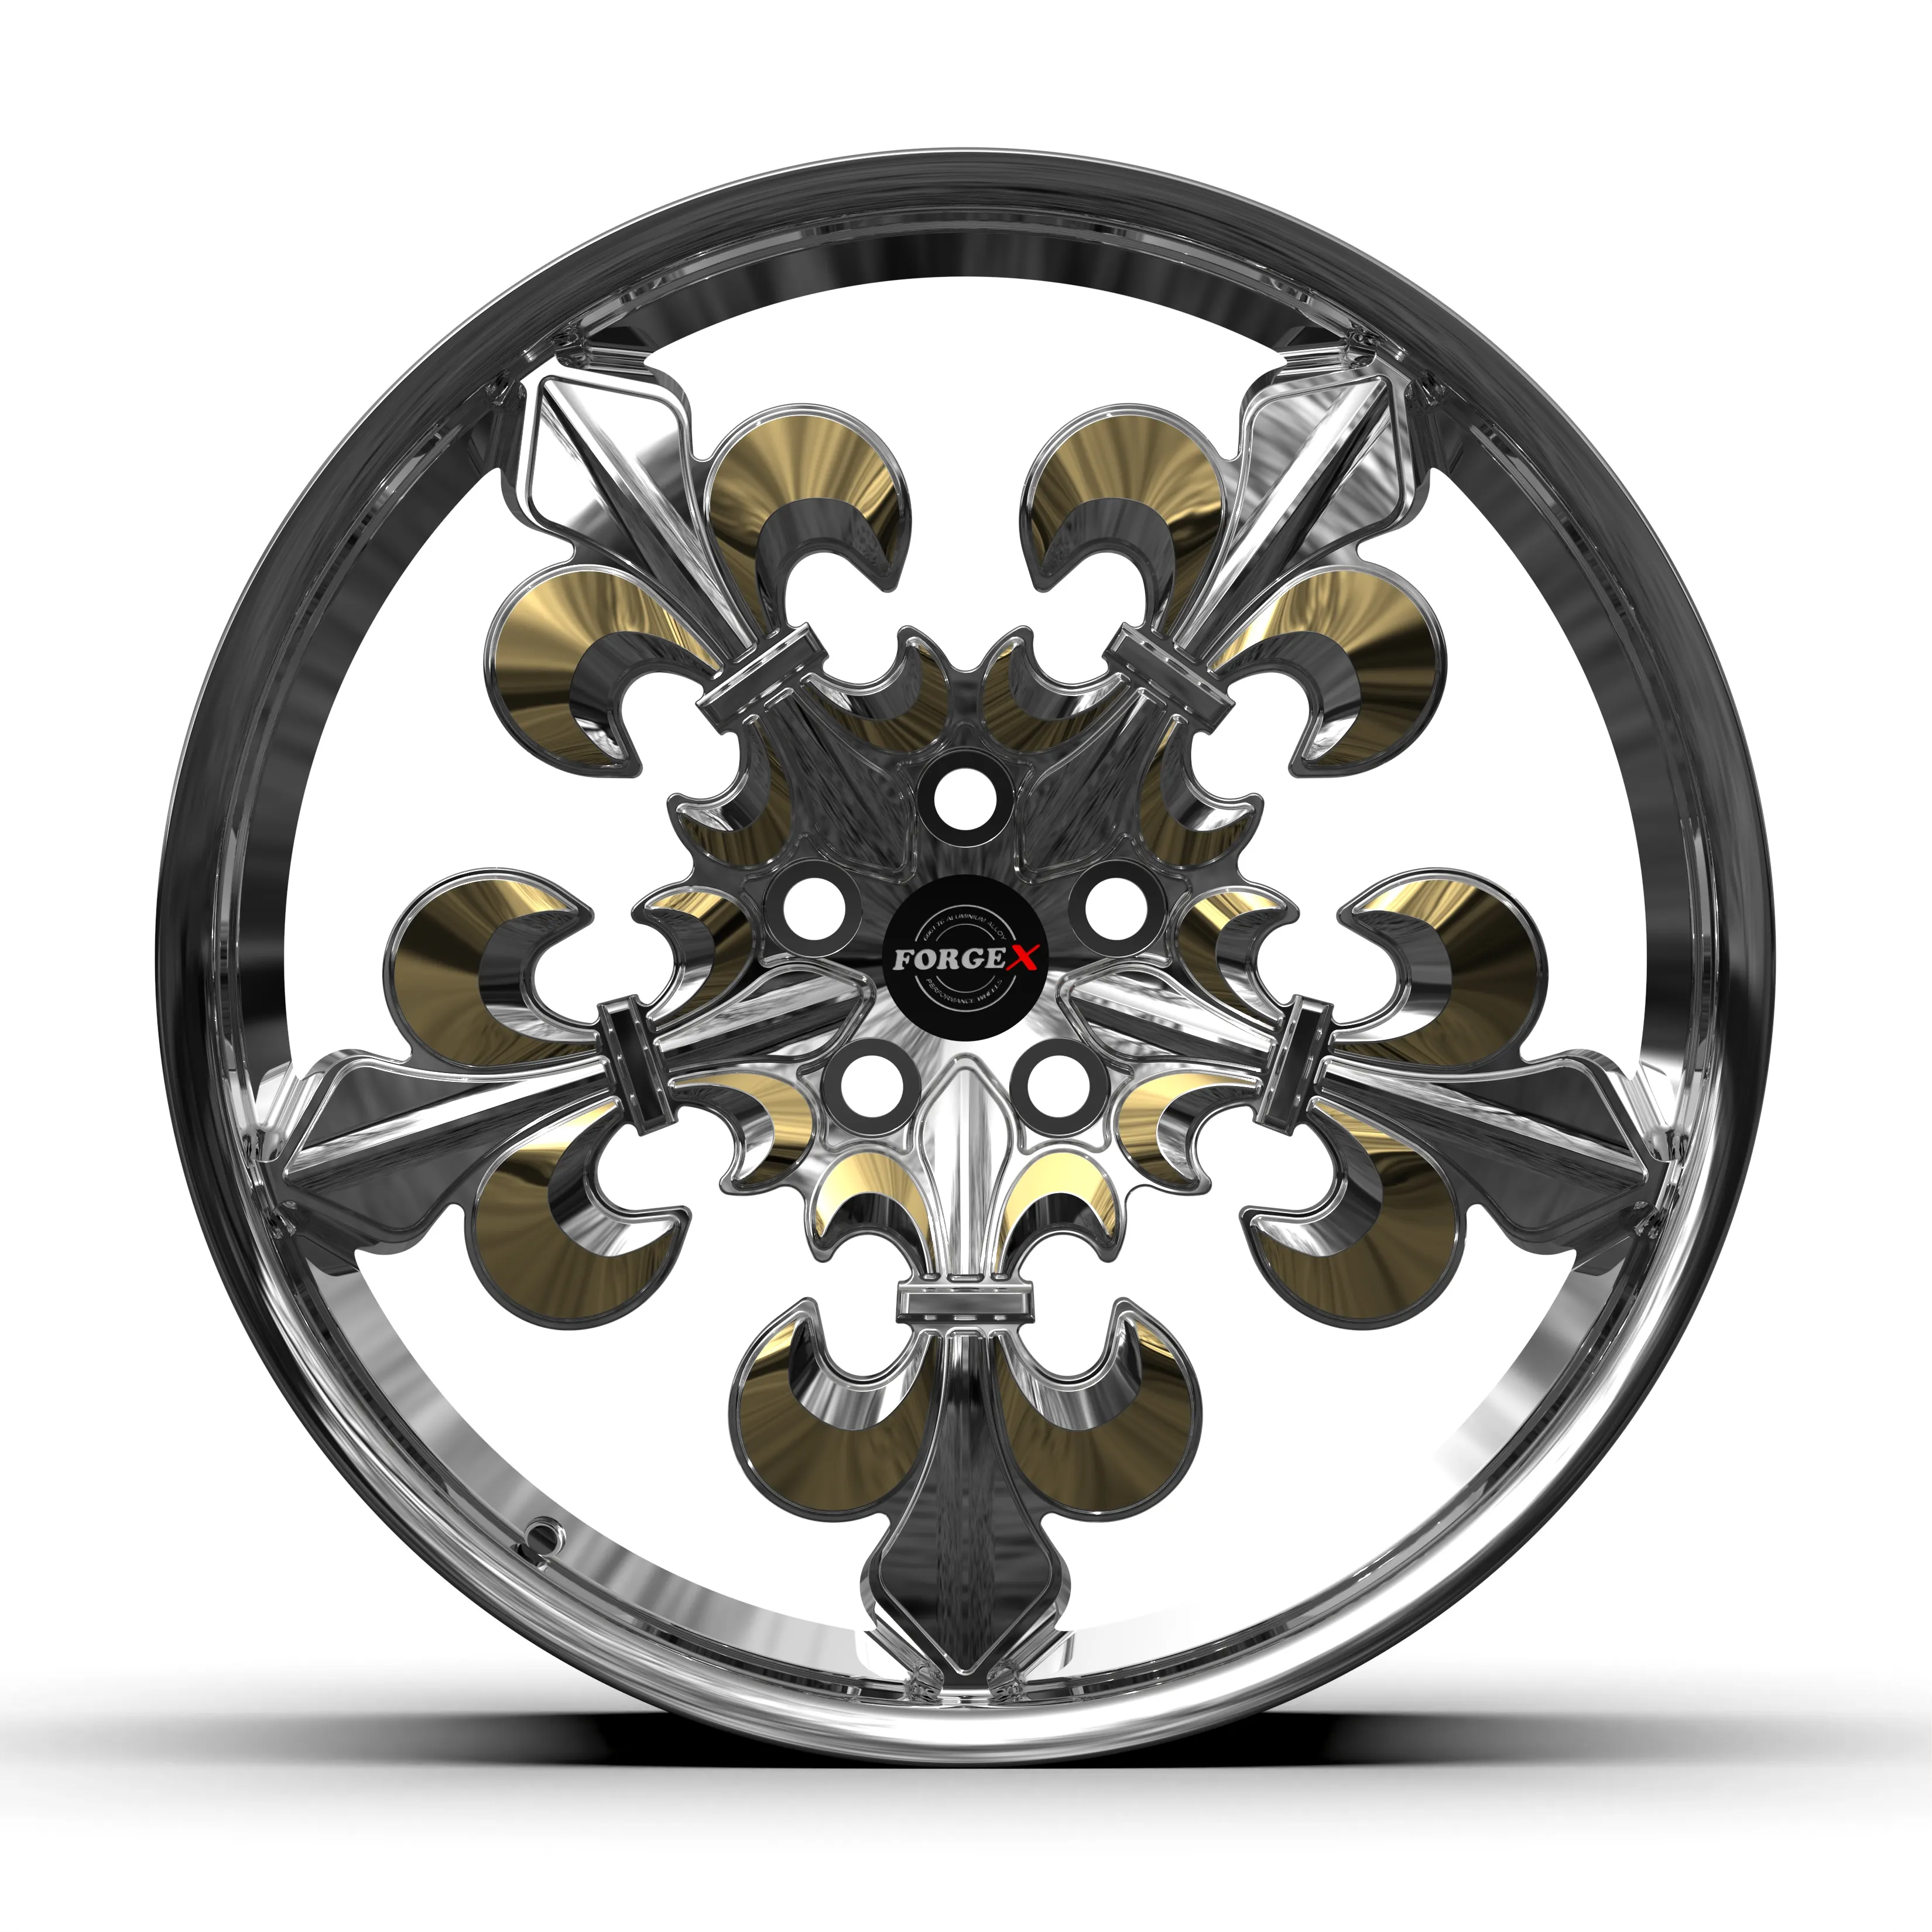 Customizable 4/5/6 Holes Polished Clear And Golden Machined Spokes Chrome Hot New Design Forged Alloy Wheels Rims in 17-22 Inch.